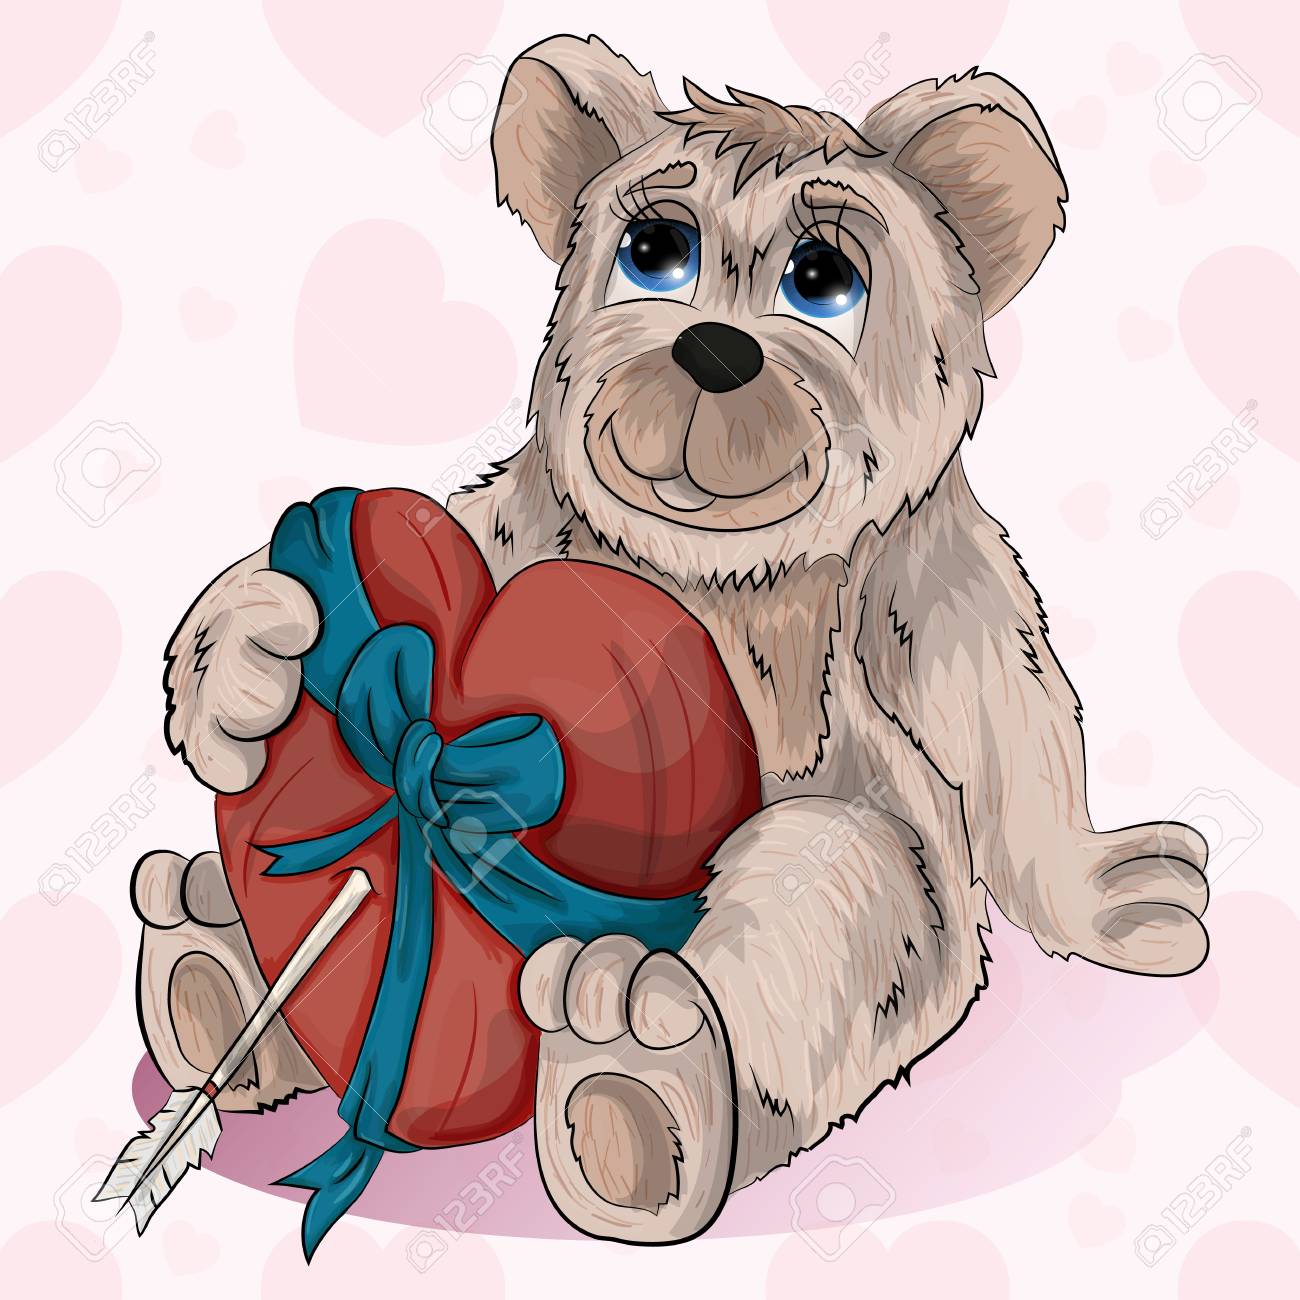 Teddy Bear Holding A Heart Drawing at GetDrawings Free download